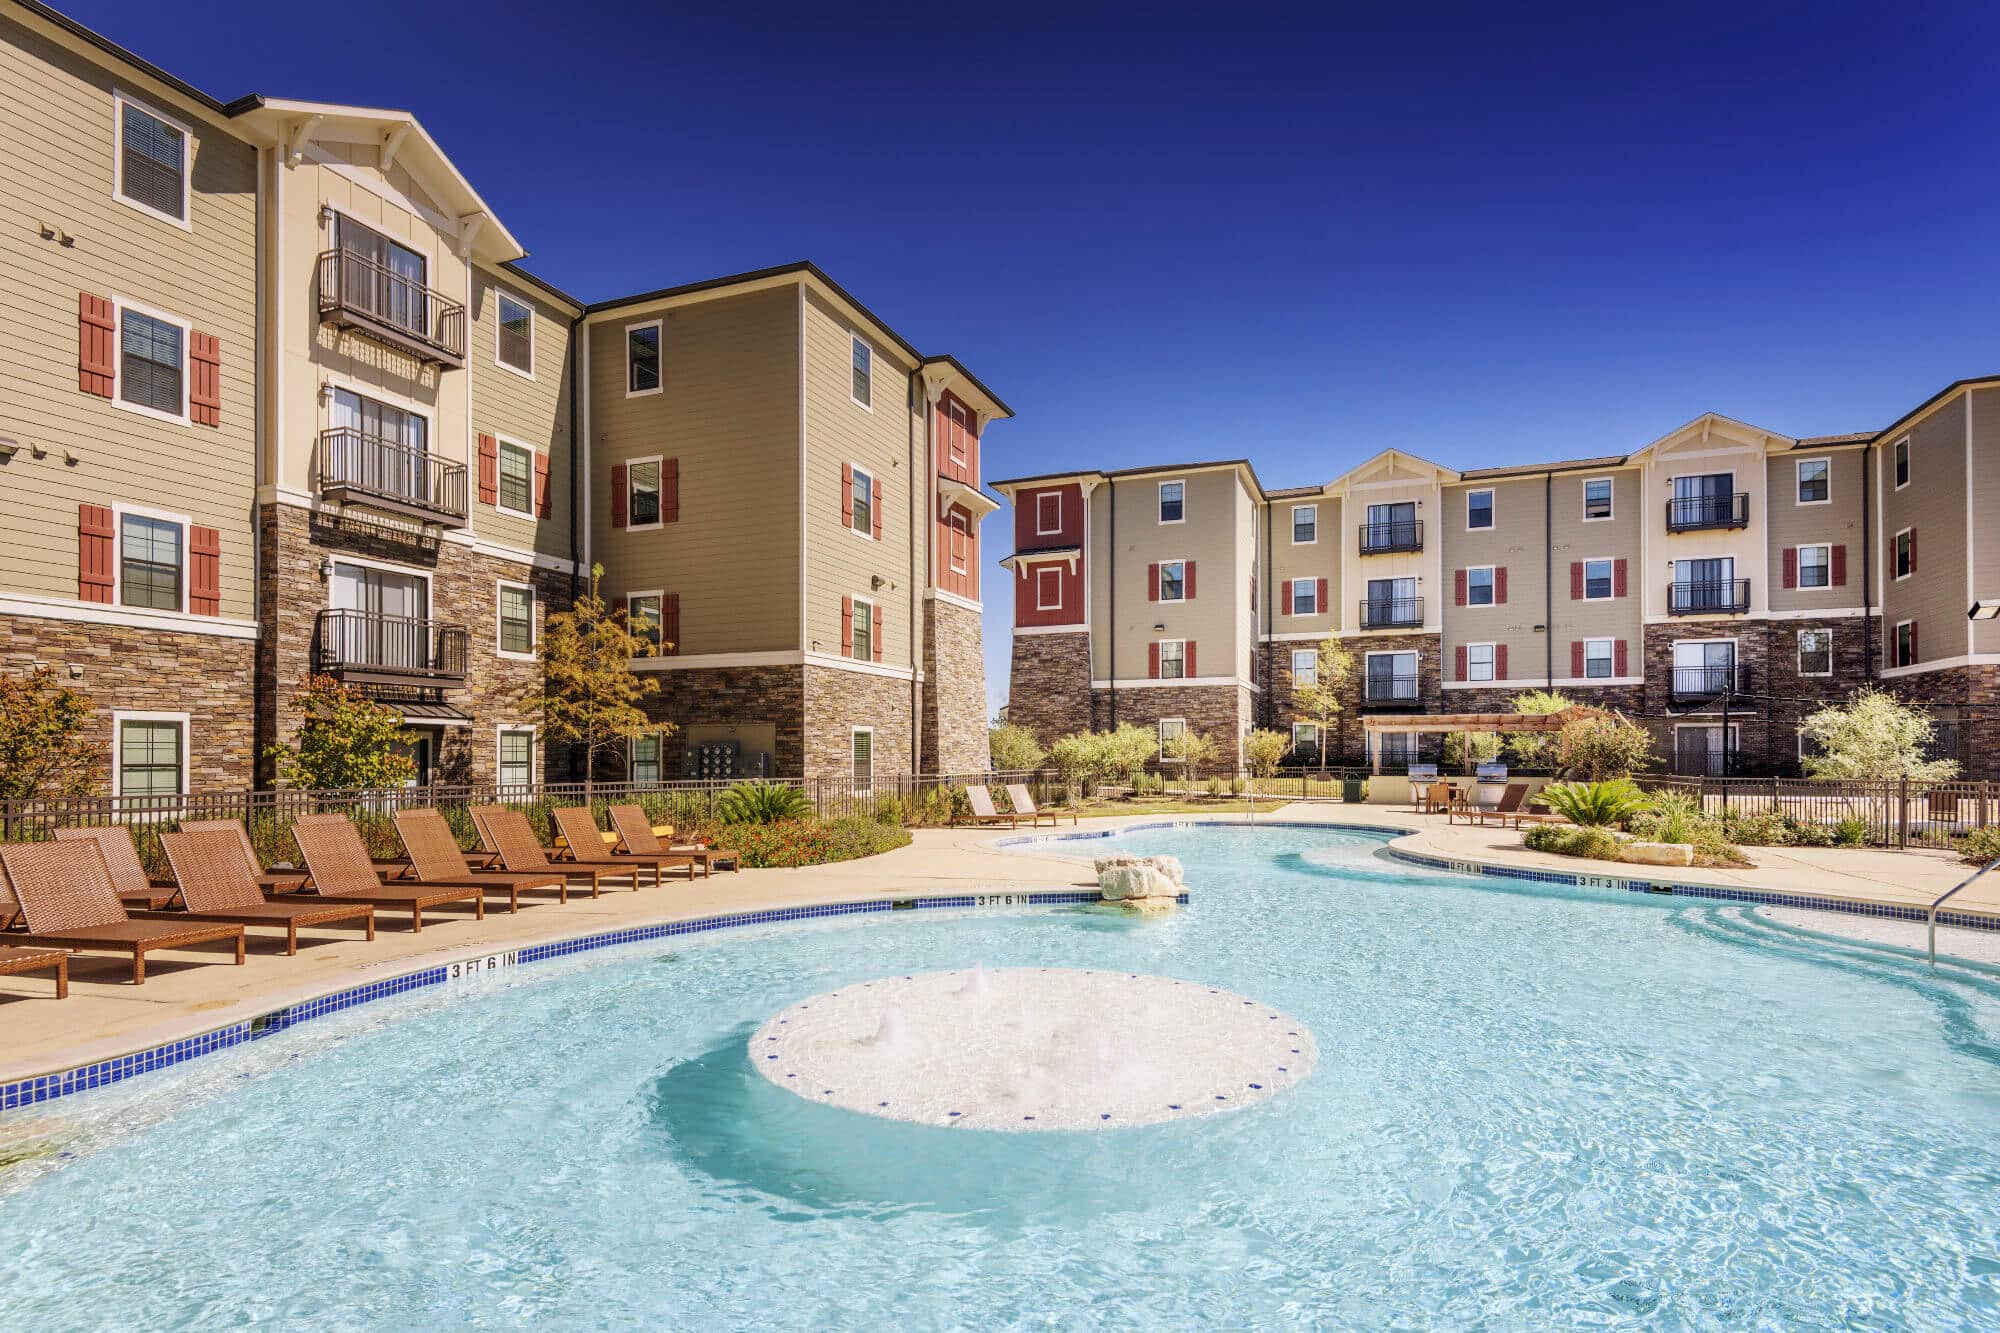 arba san marcos off campus apartments near texas state university california style pool lounging deck building exterior